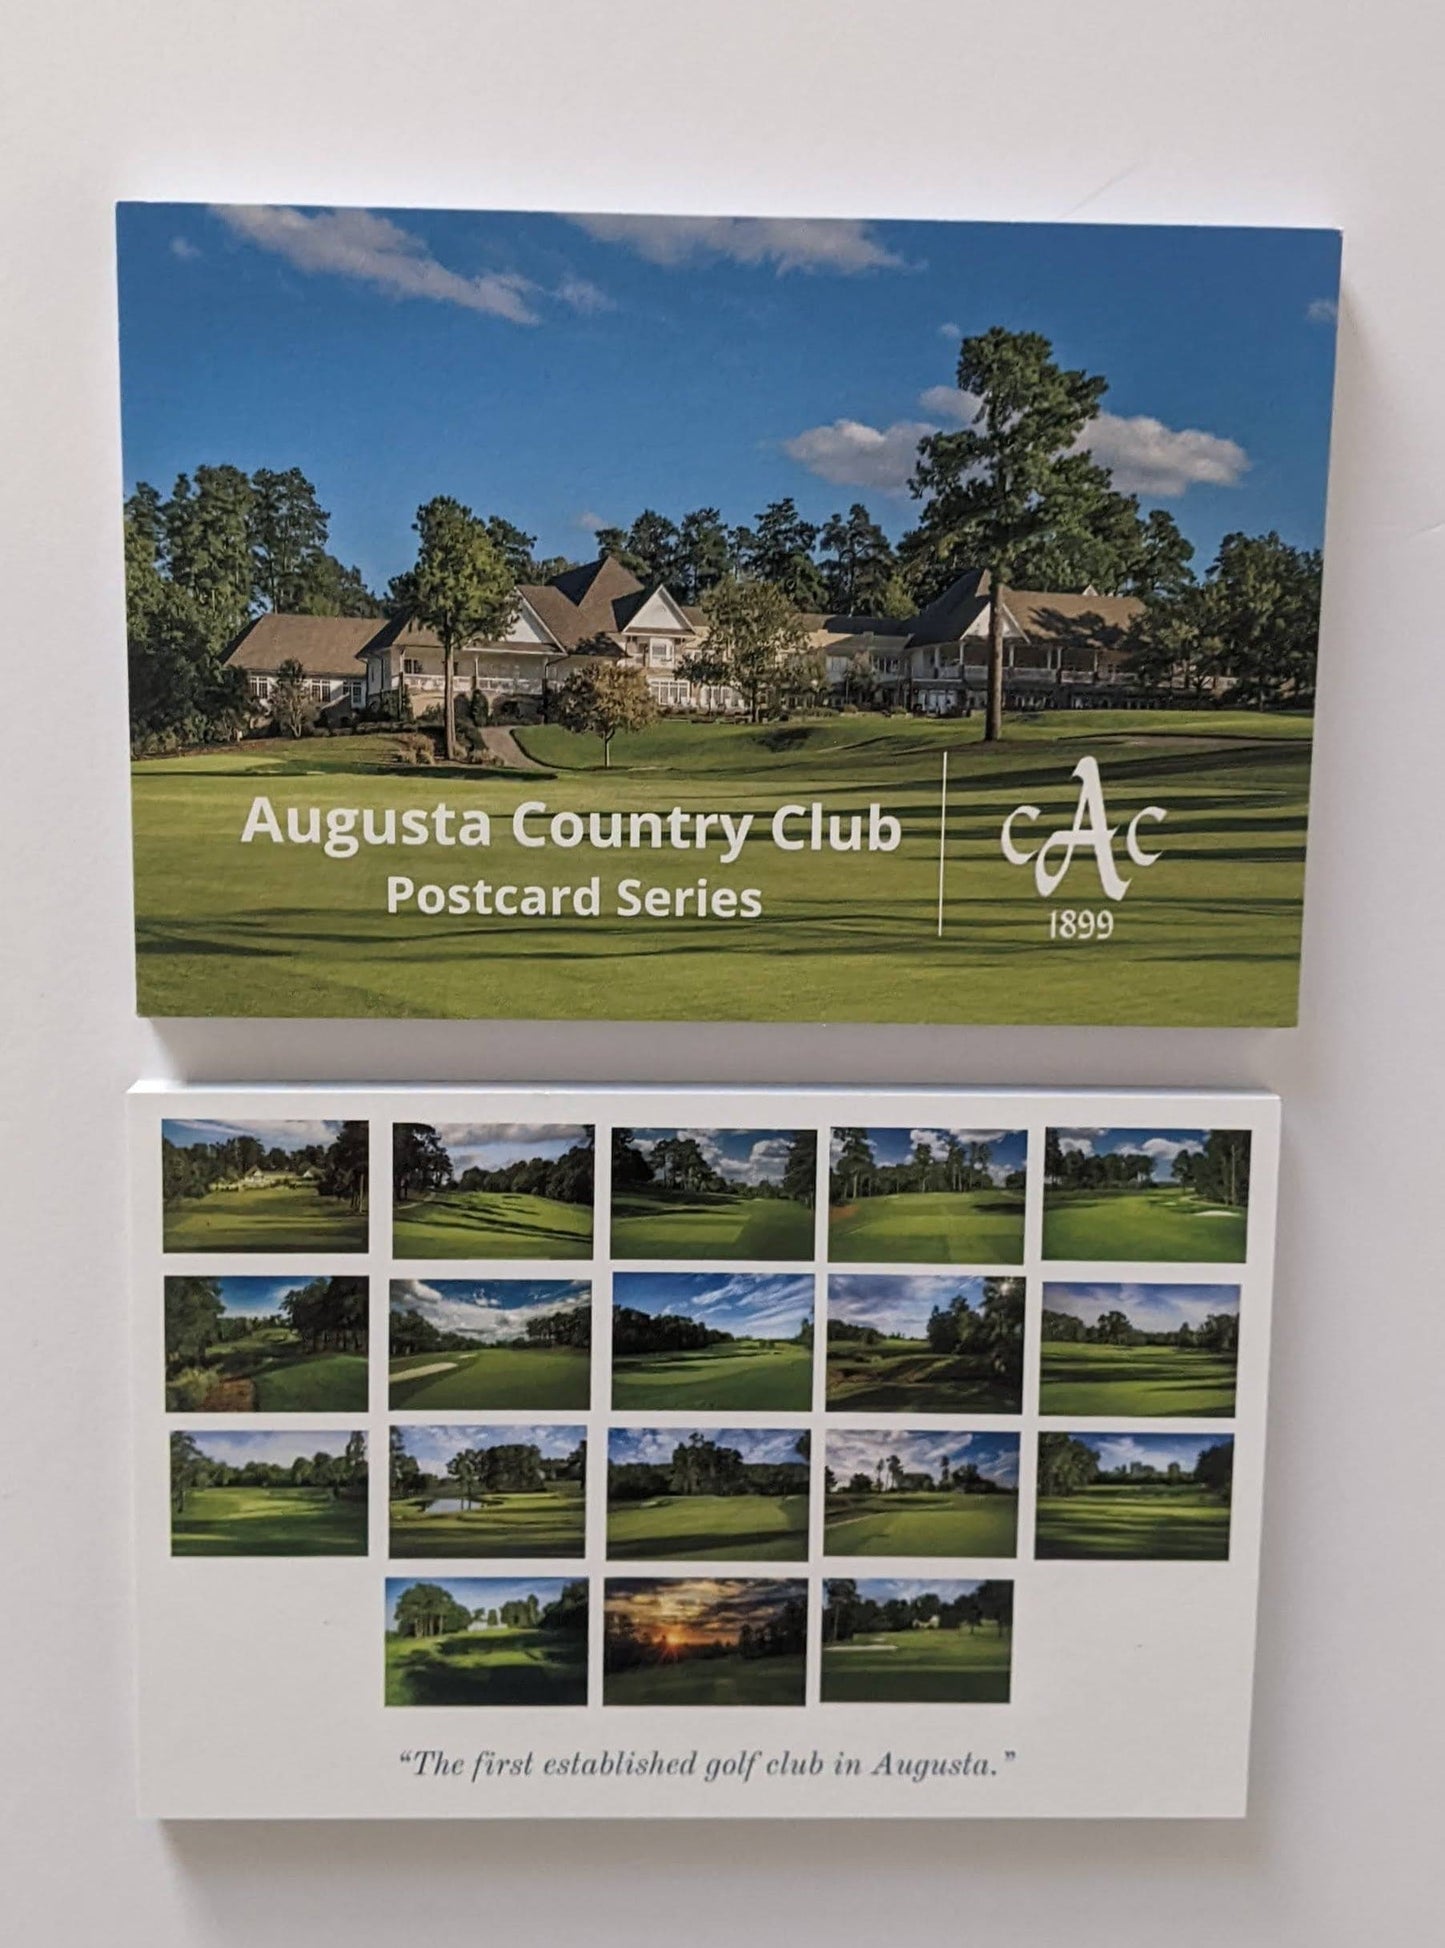 August Country Club